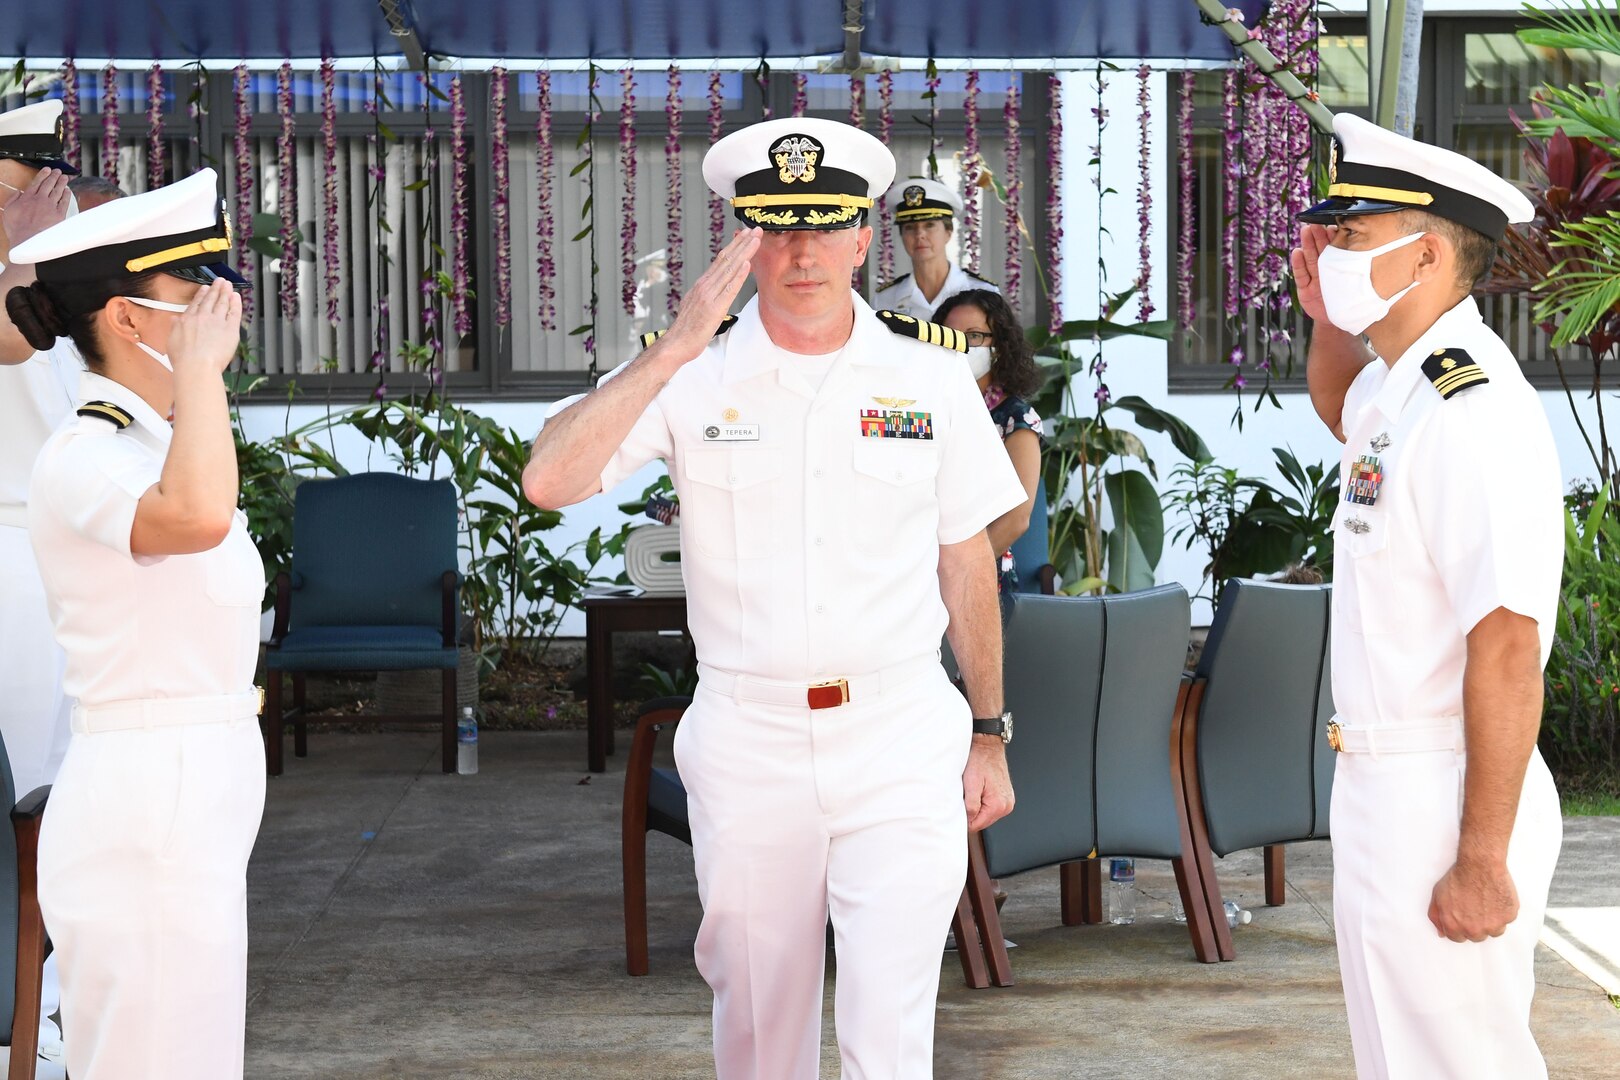 The Commanding Officer of Navy Medicine Readiness and Training Command Pearl Harbor salutes as he is piped ashore by the boatswain following the ceremony.